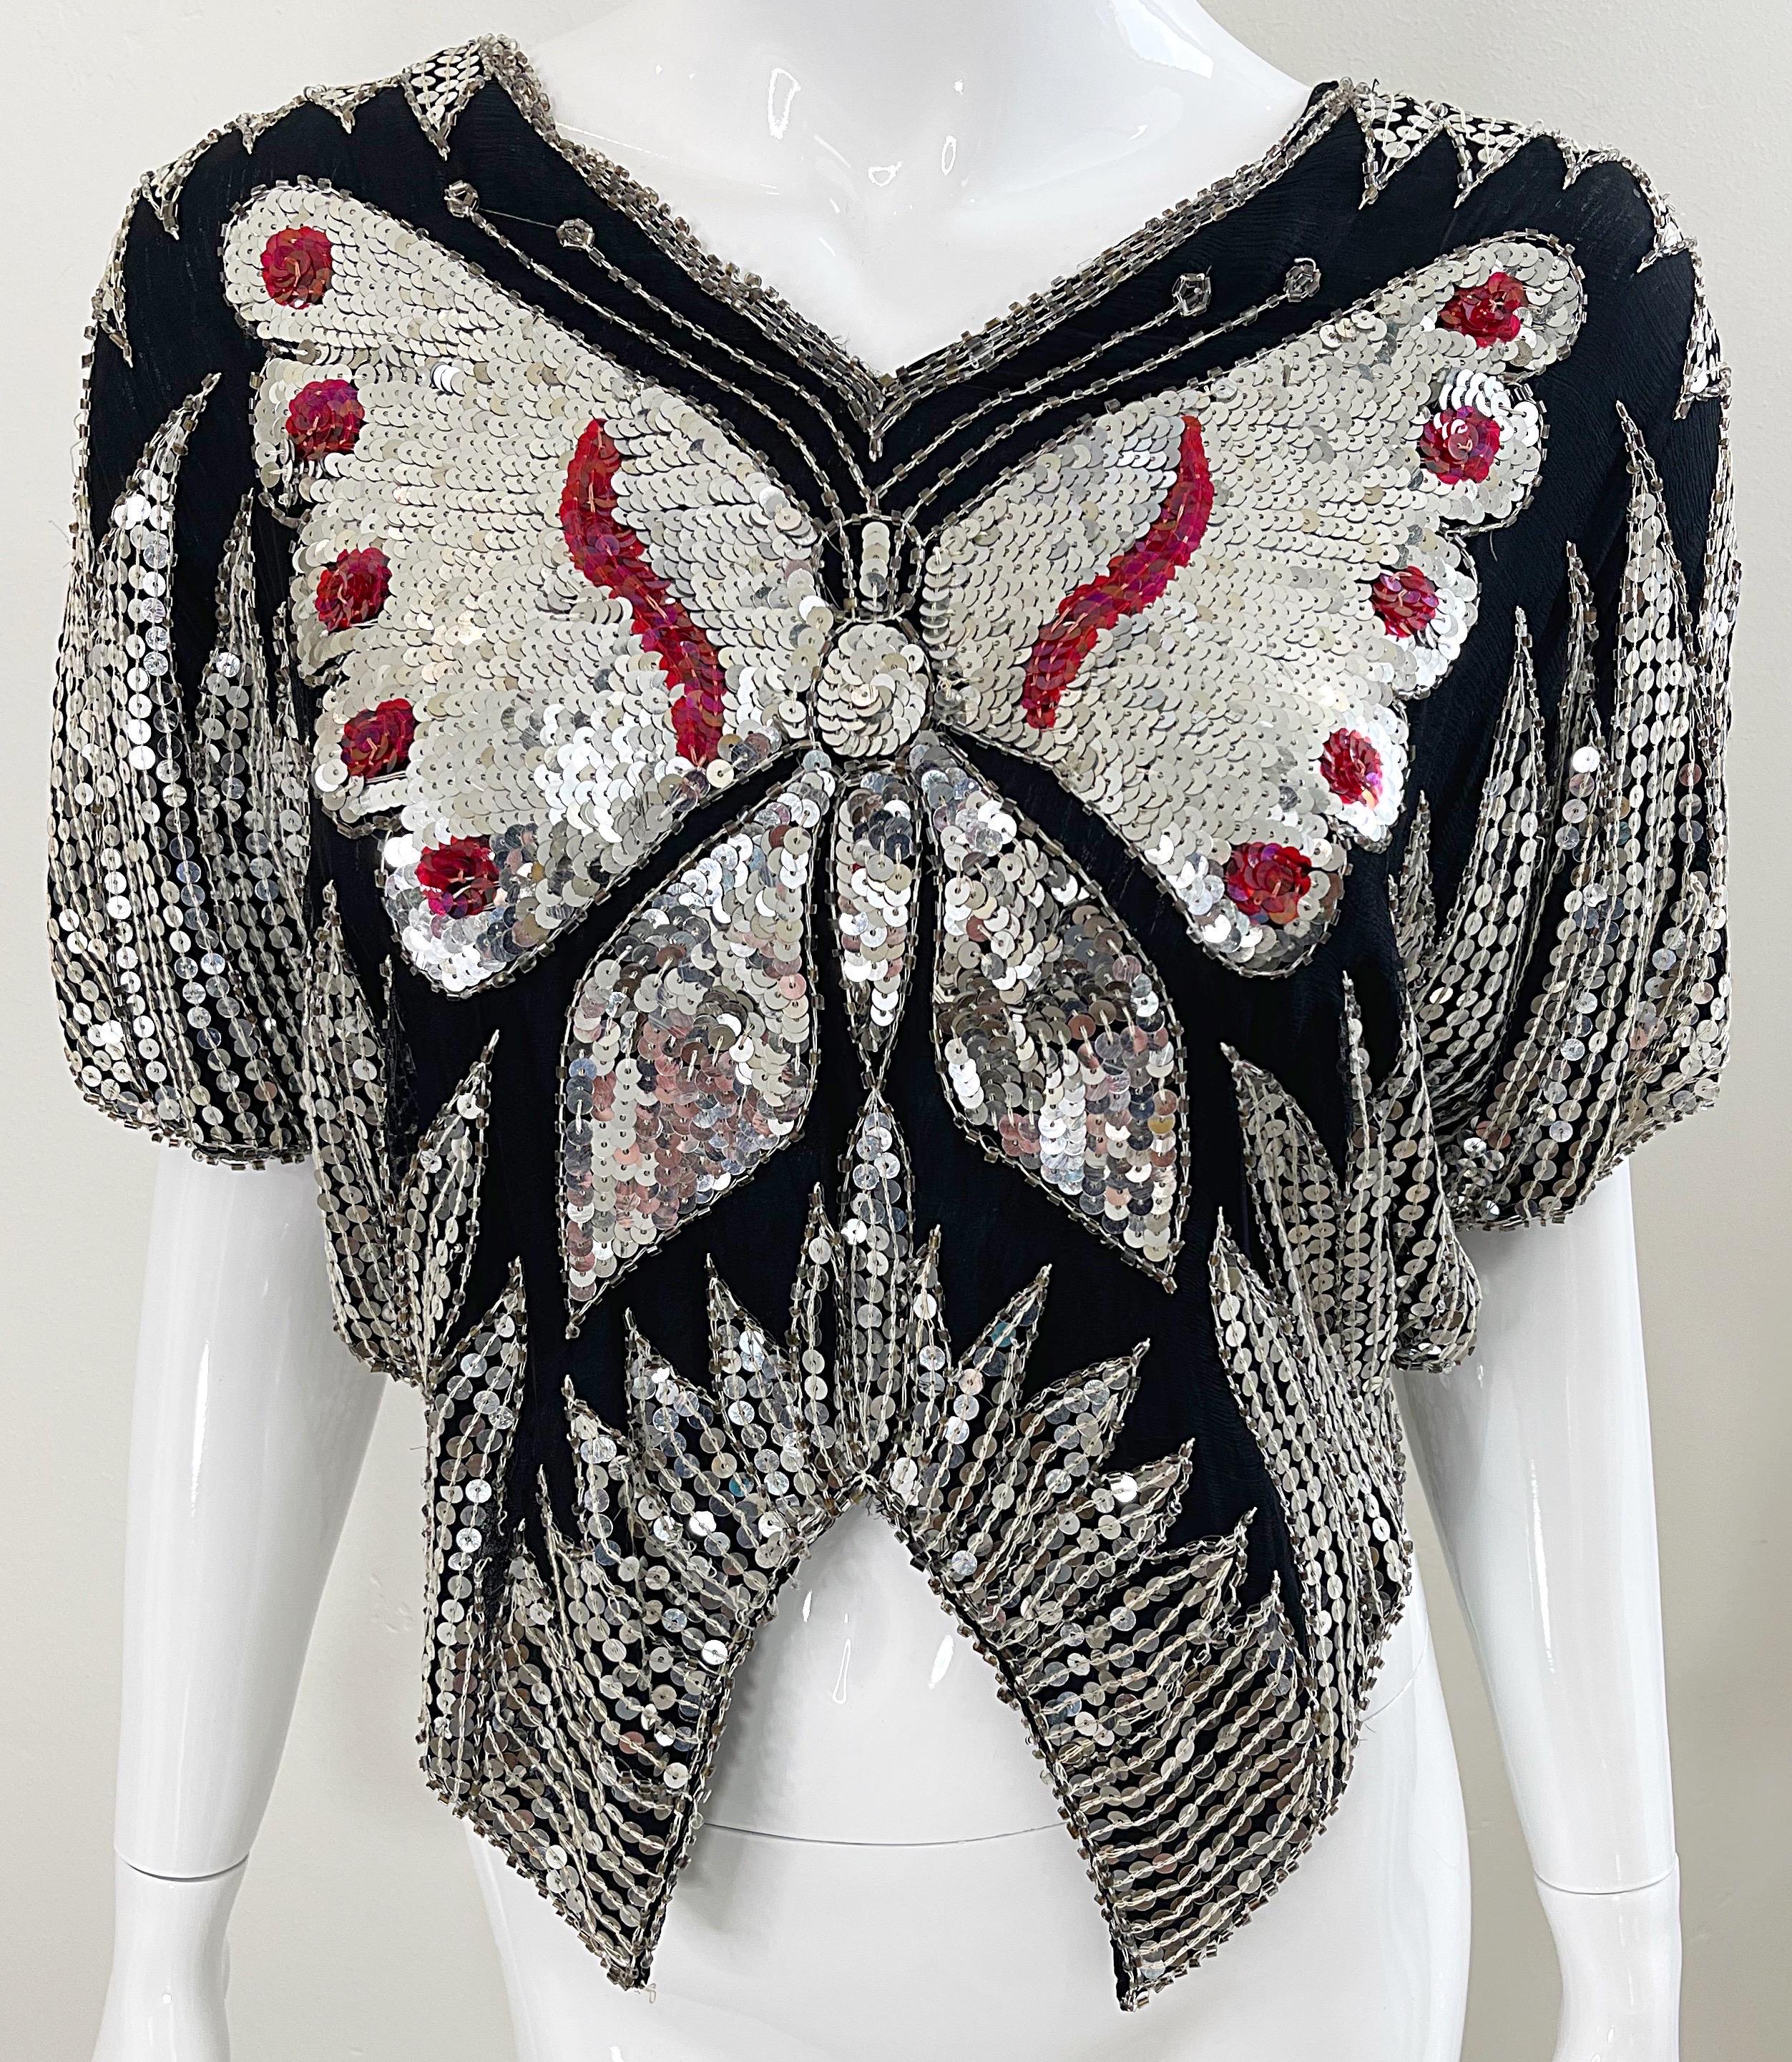 Studio 54 Early 1980s Butterfly Red Silver Black Sequin Disco Vintage 80s Top For Sale 4